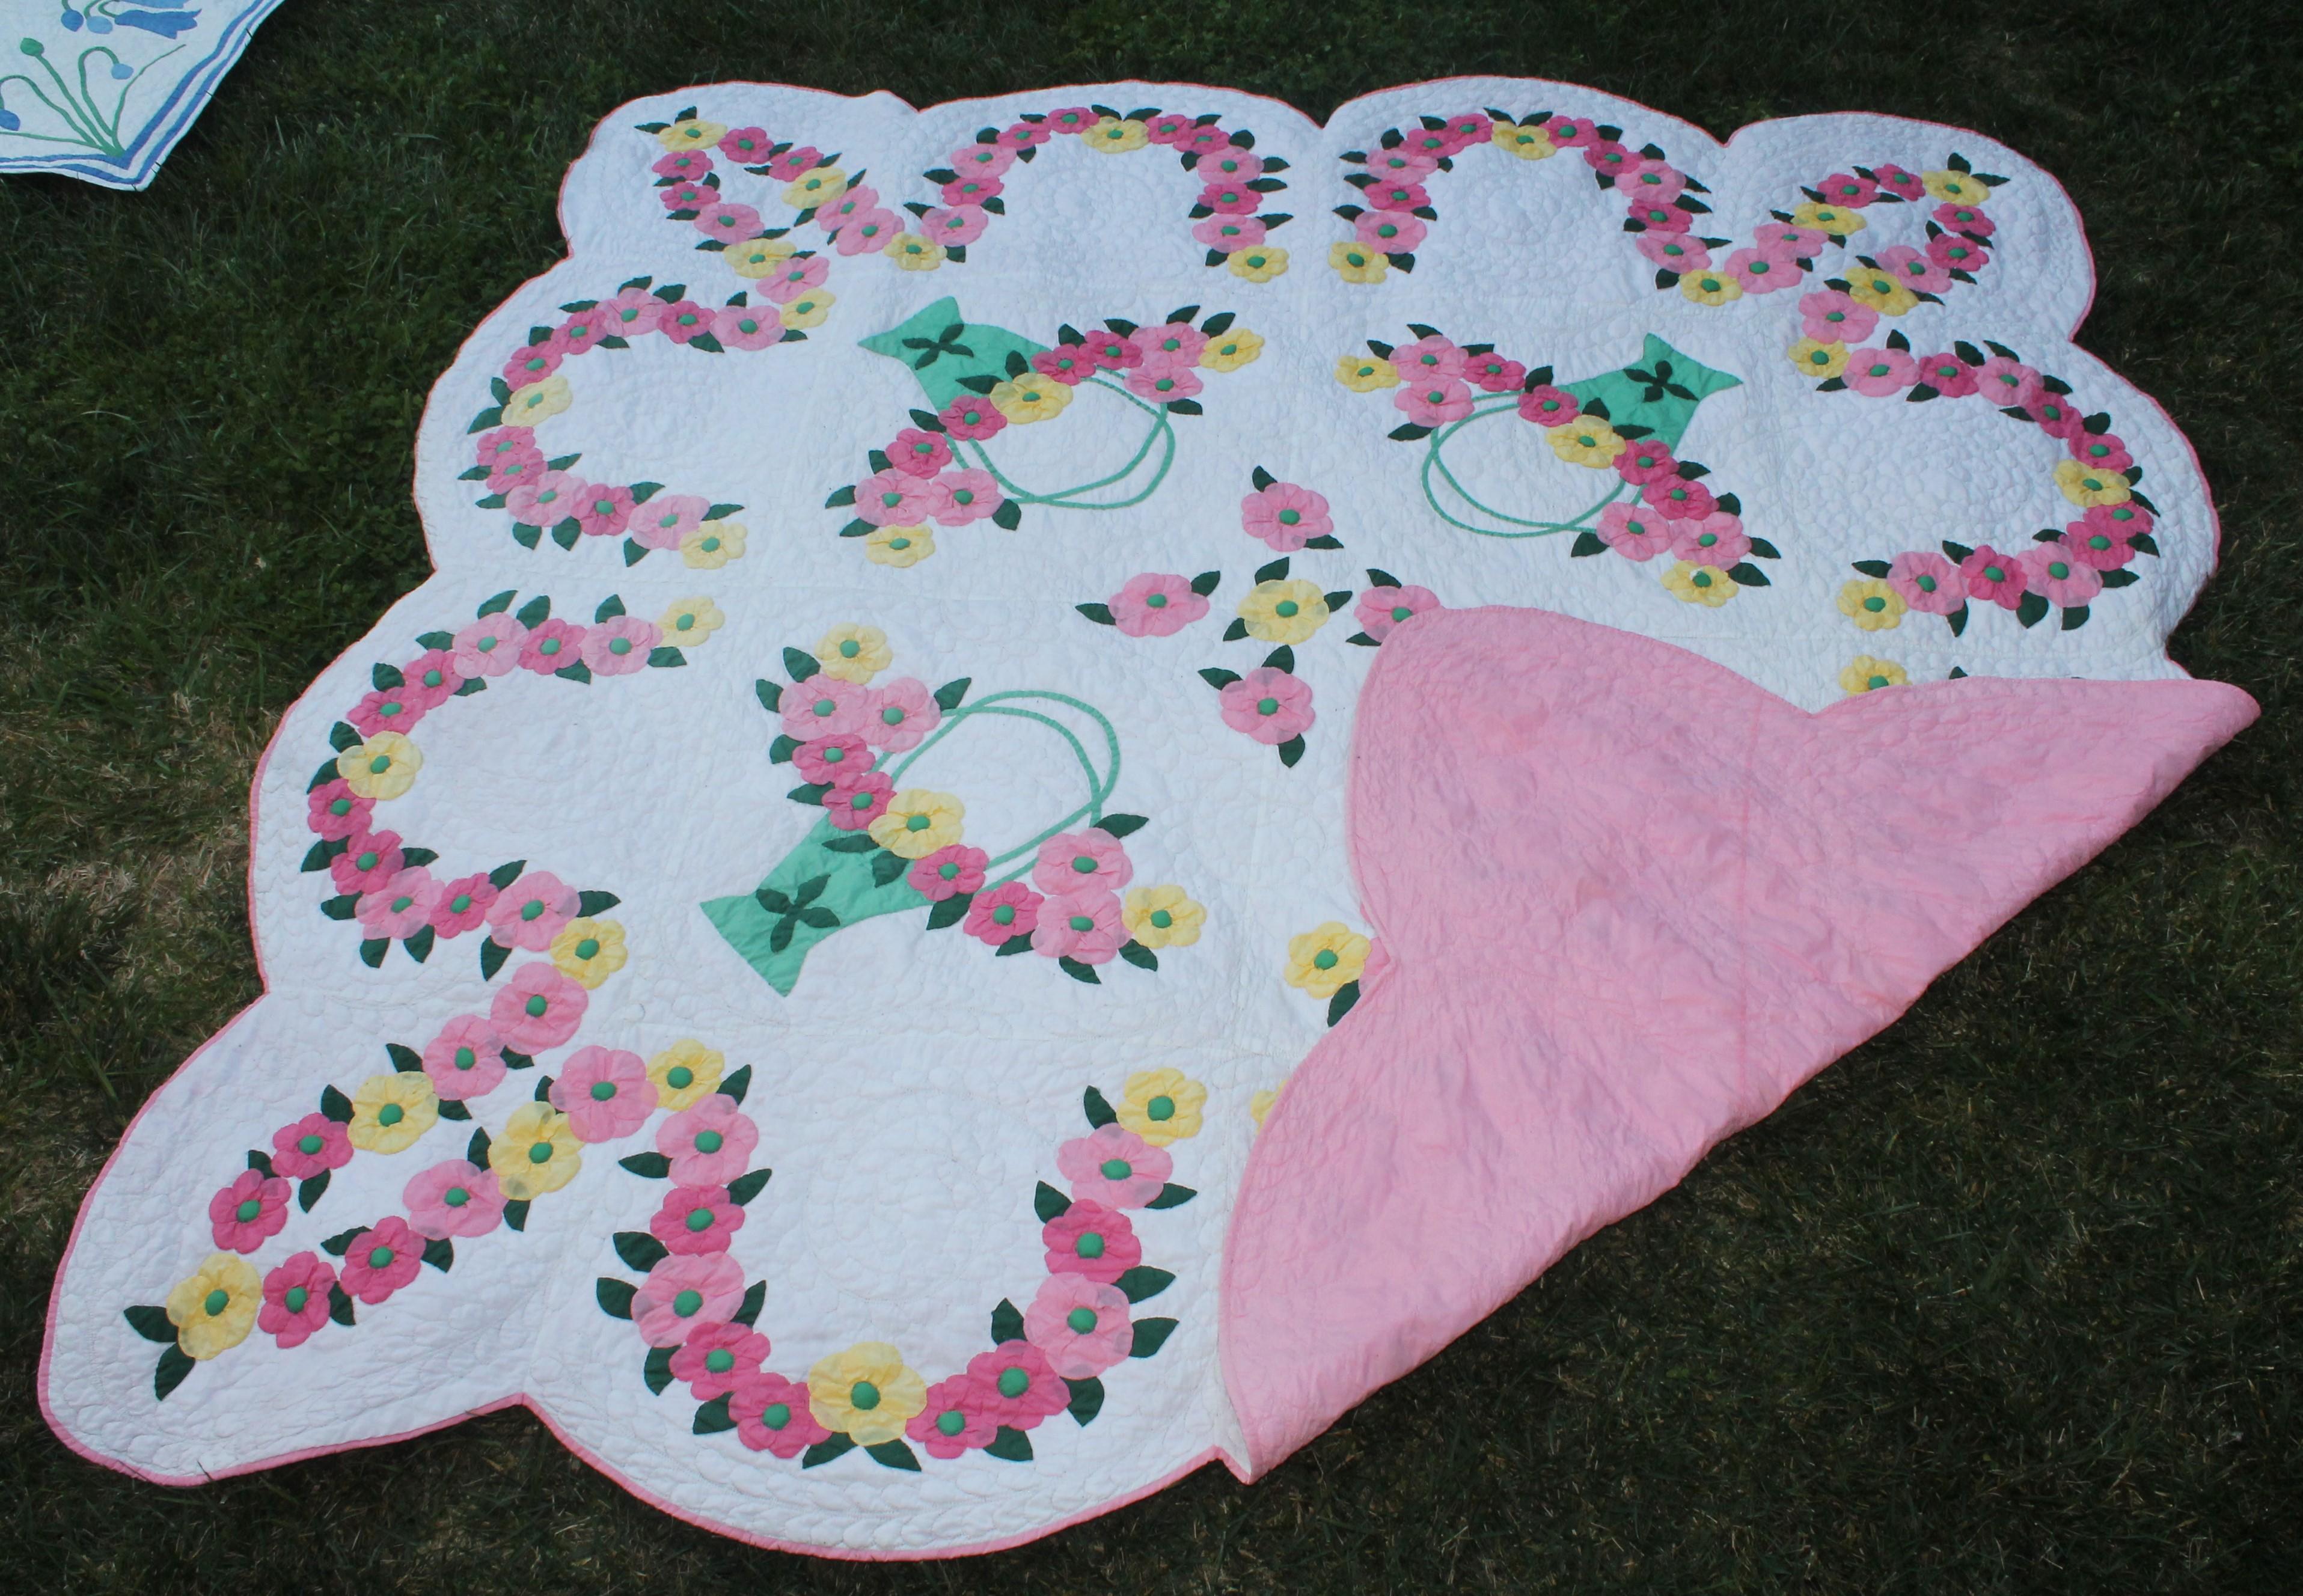 Antique applique quilt with dogwood flowers and baskets. The detail work is amazing. Tight stitching and fine applique. Looks like a Marie Webster quilt.